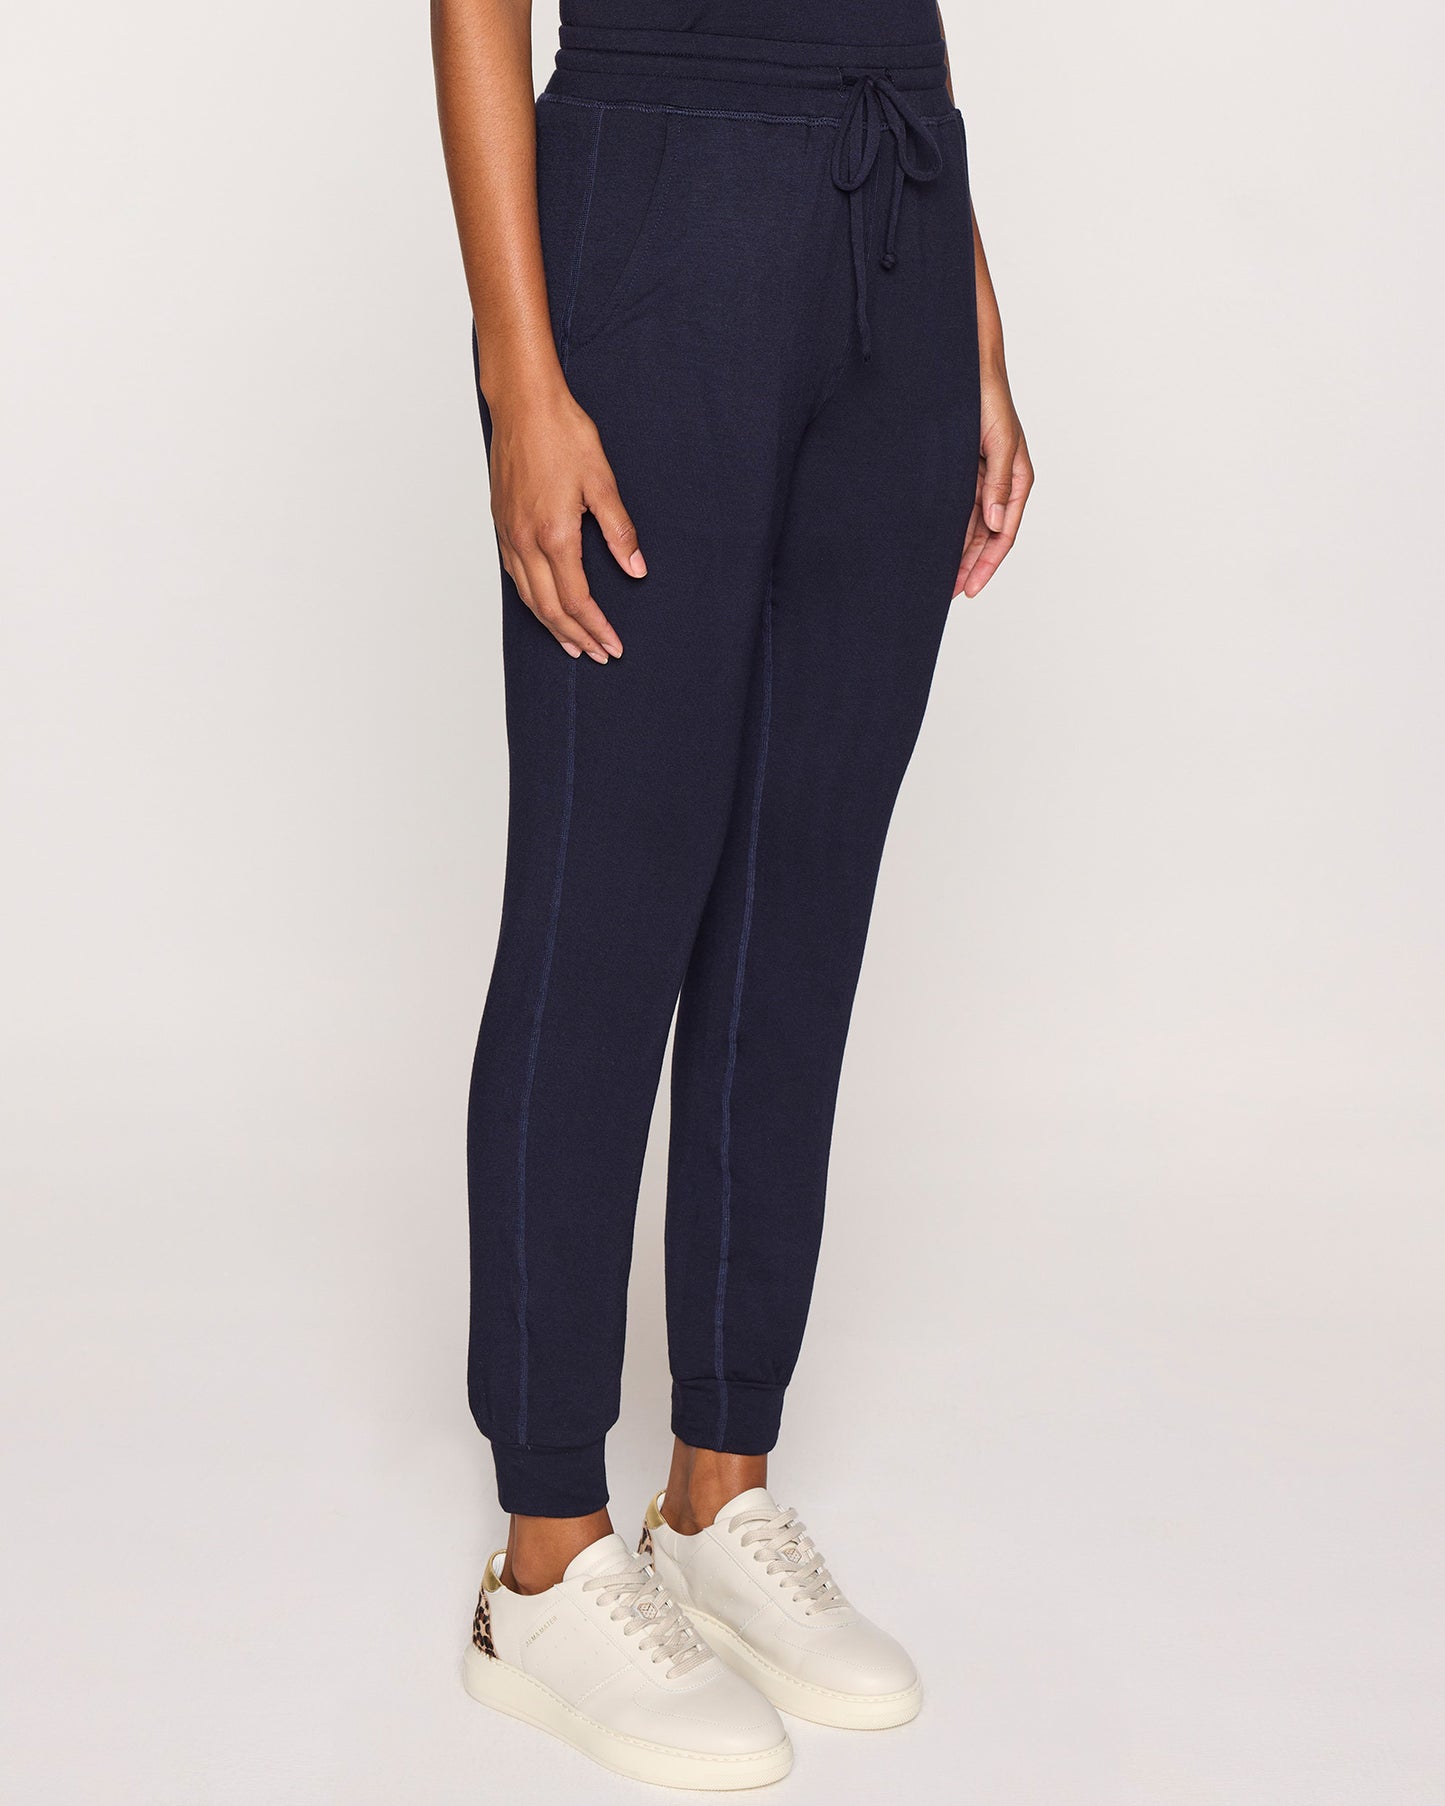 Navy | The Women's Elevated Jogger Angle